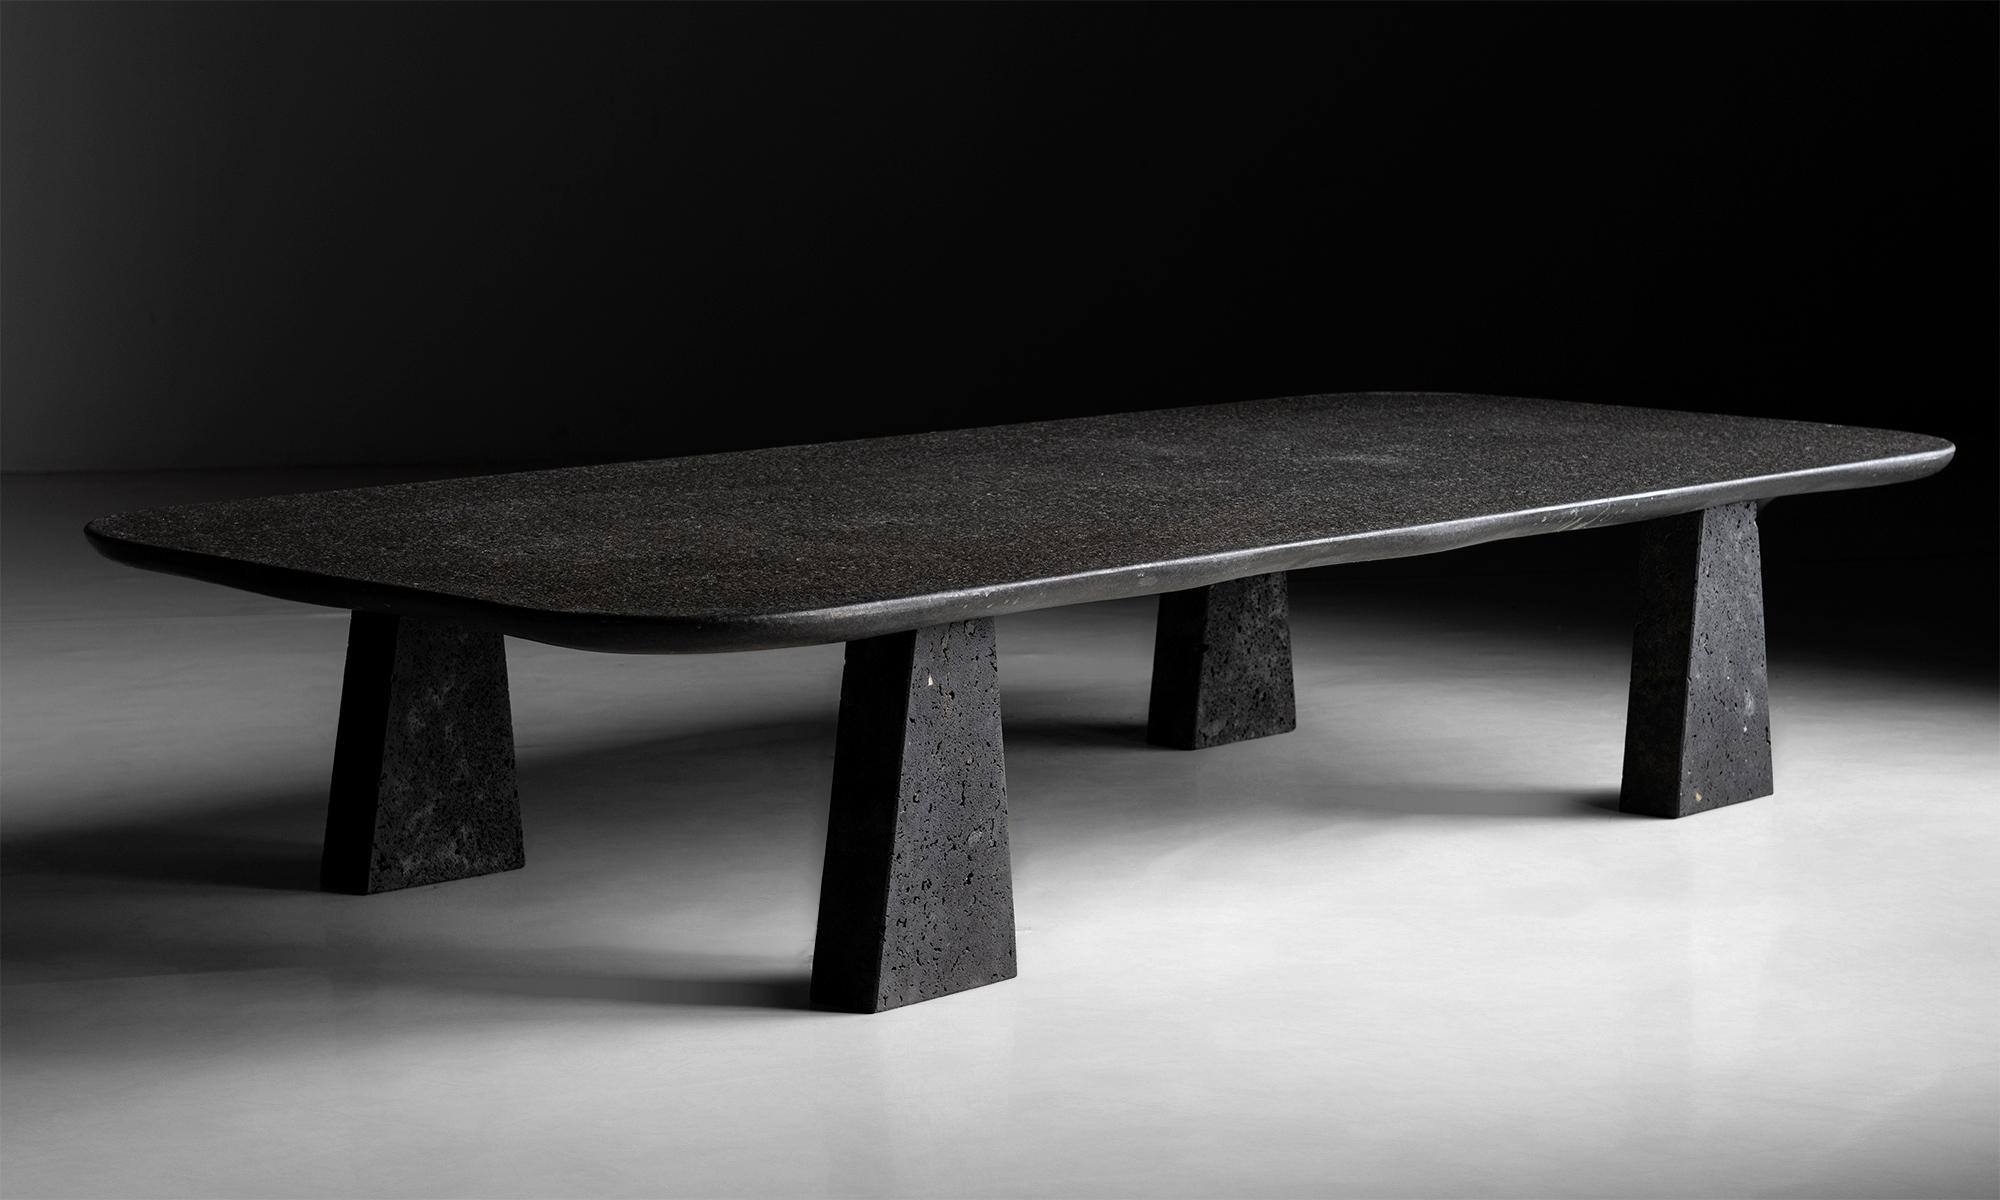 Volcanic stone coffee table

Spain circa 1990

Black basalt coffee table with smooth finish, on four legs. Custom made for an 

architects home in Catalonia.

Measures: 66.75”L x 28.25”d x 12”h.
 